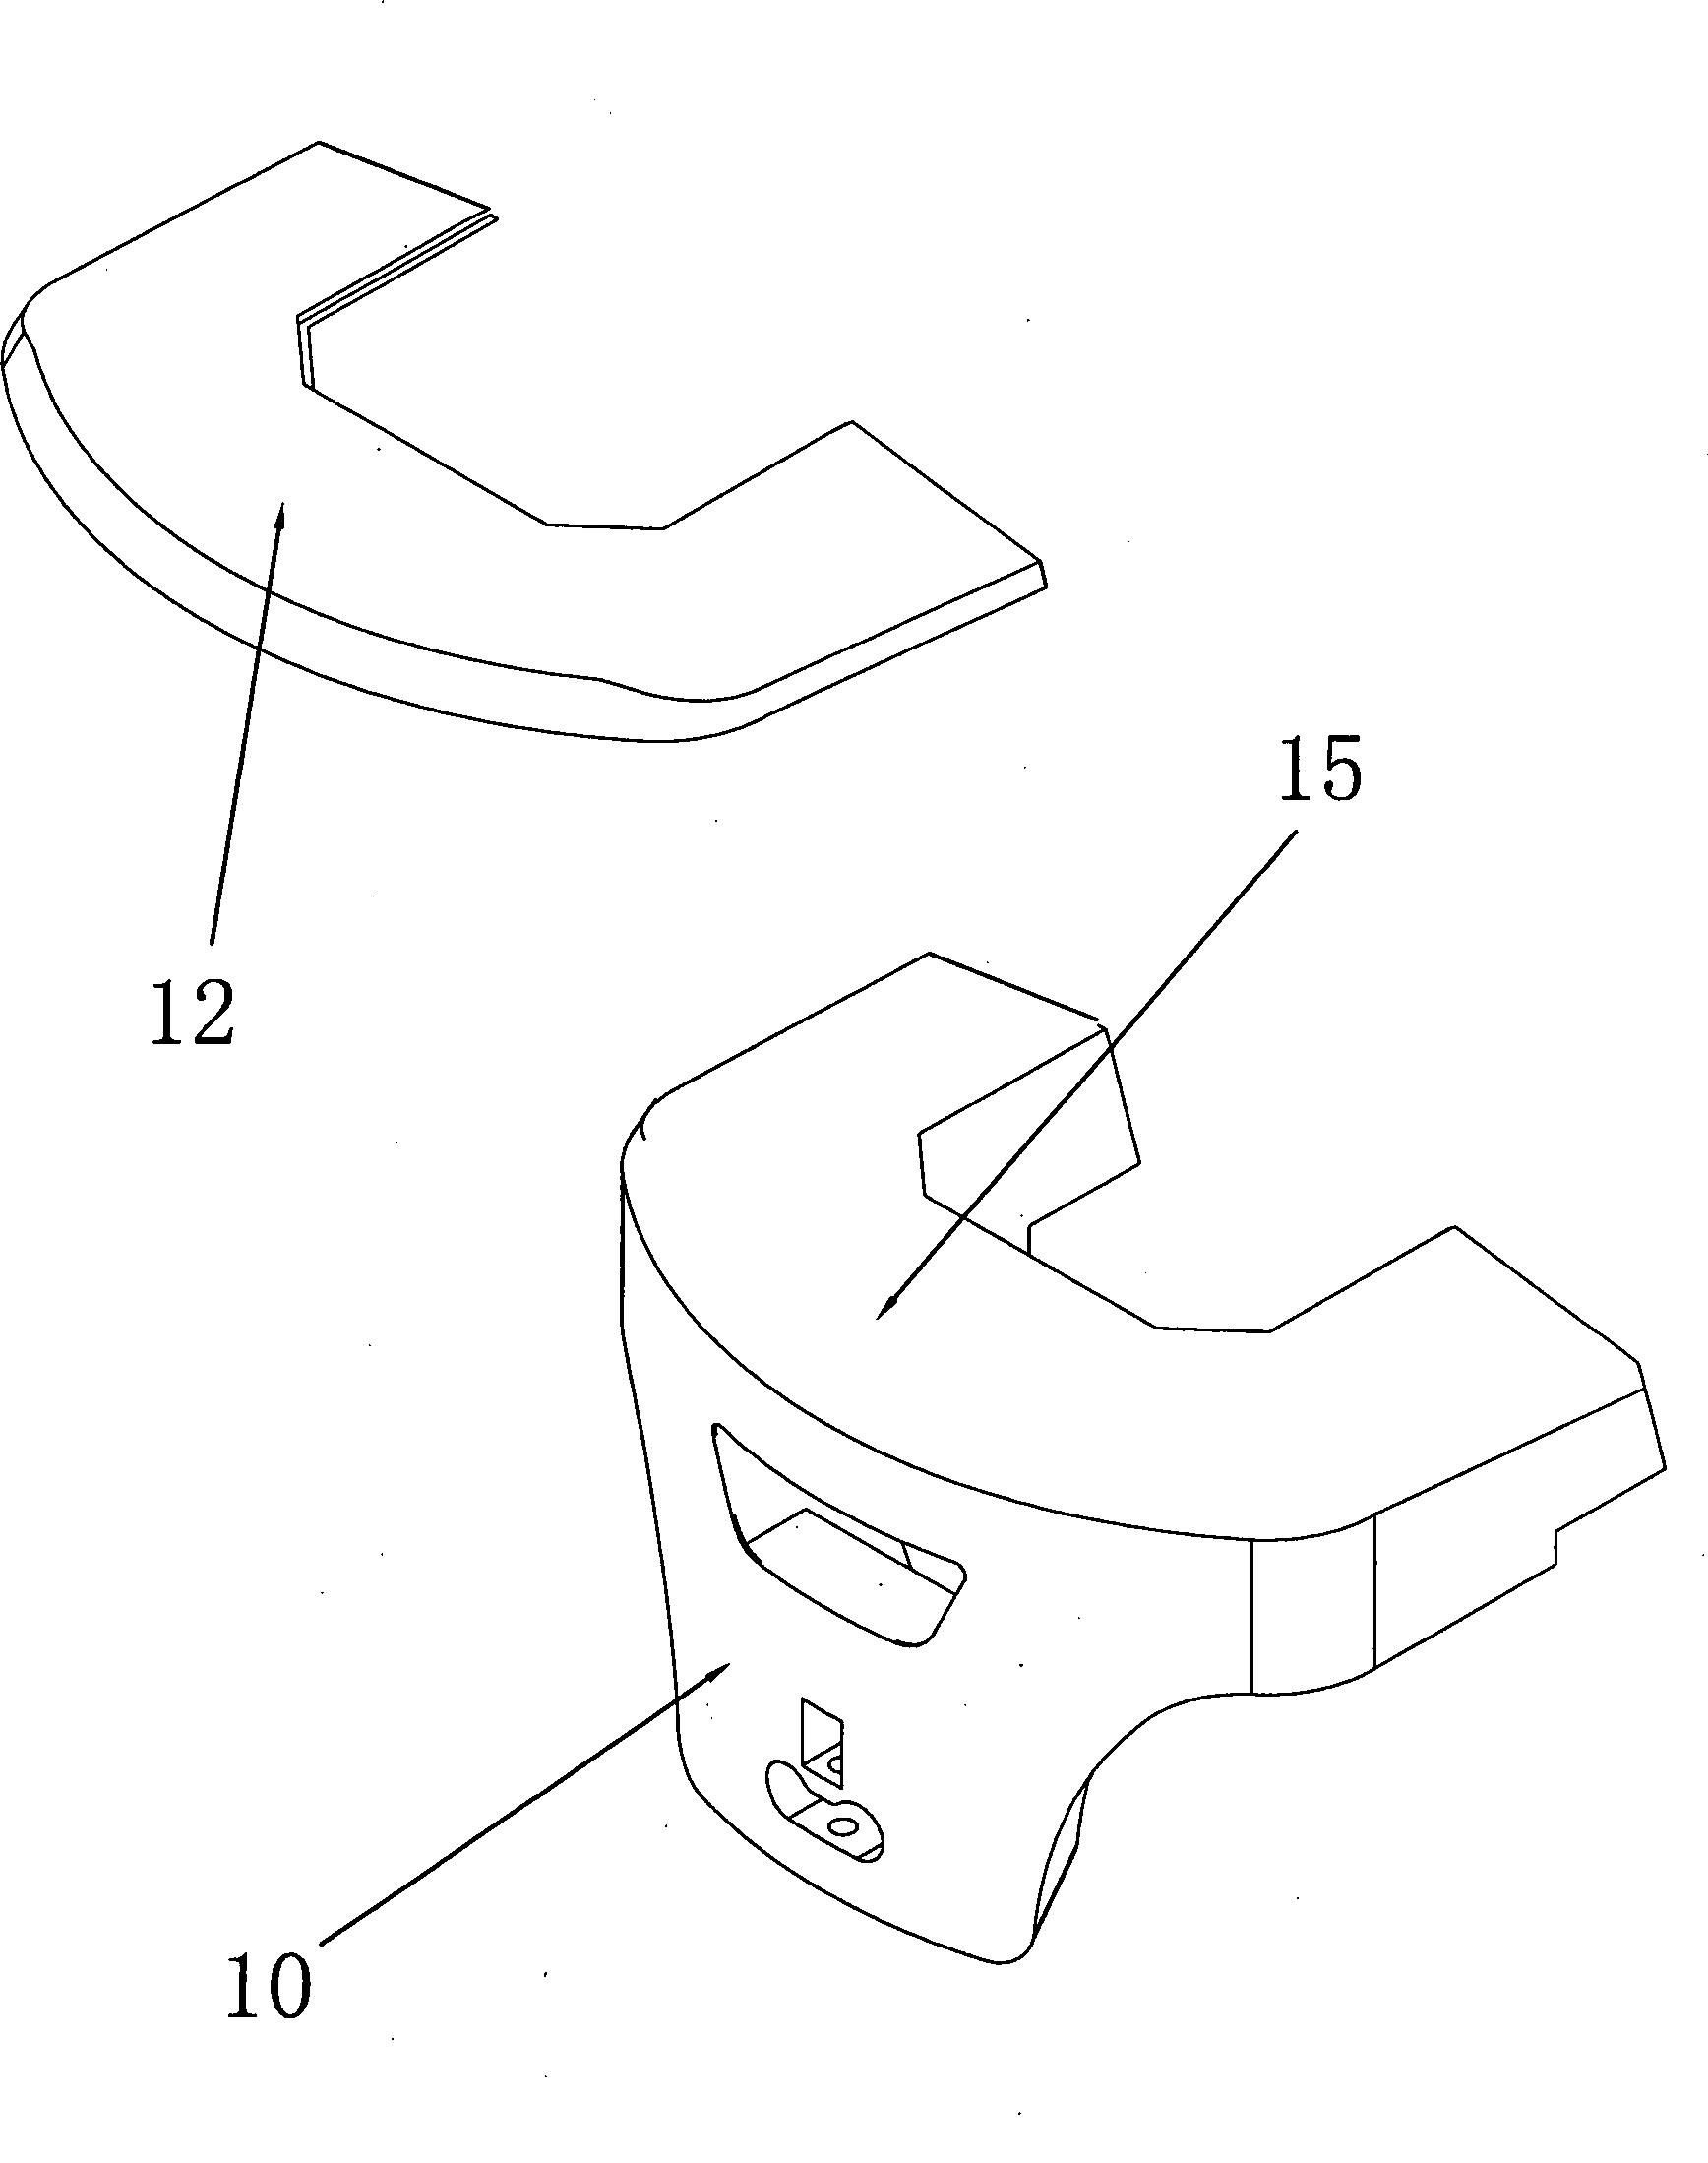 Weight clump manufacturing method